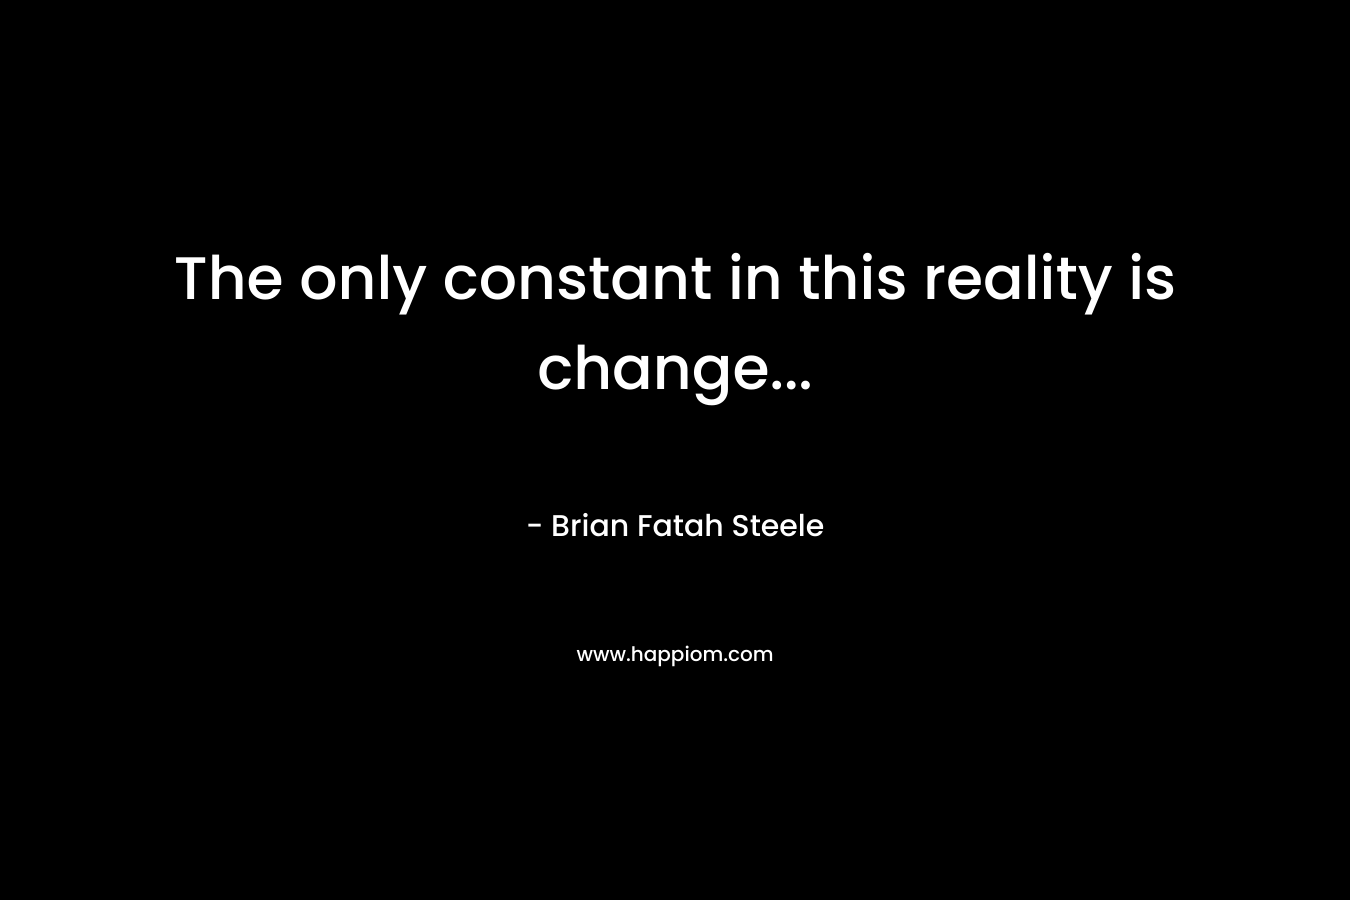 The only constant in this reality is change...